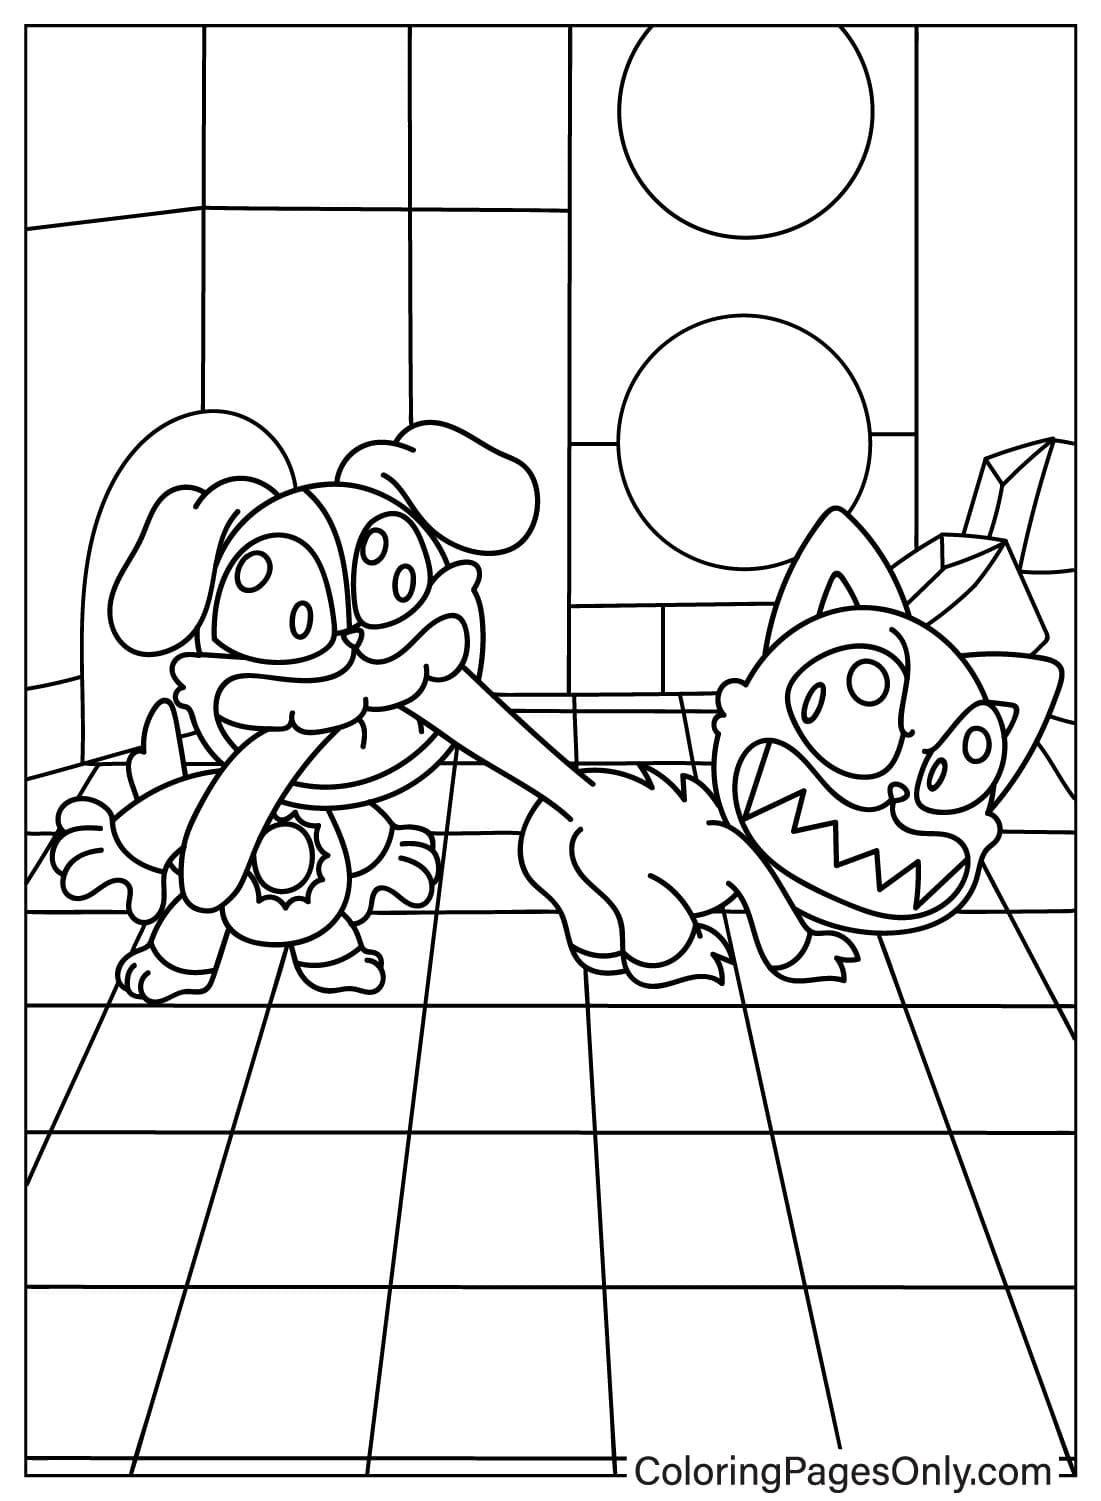 Images DogDay and CatNap Coloring Page from CatNap